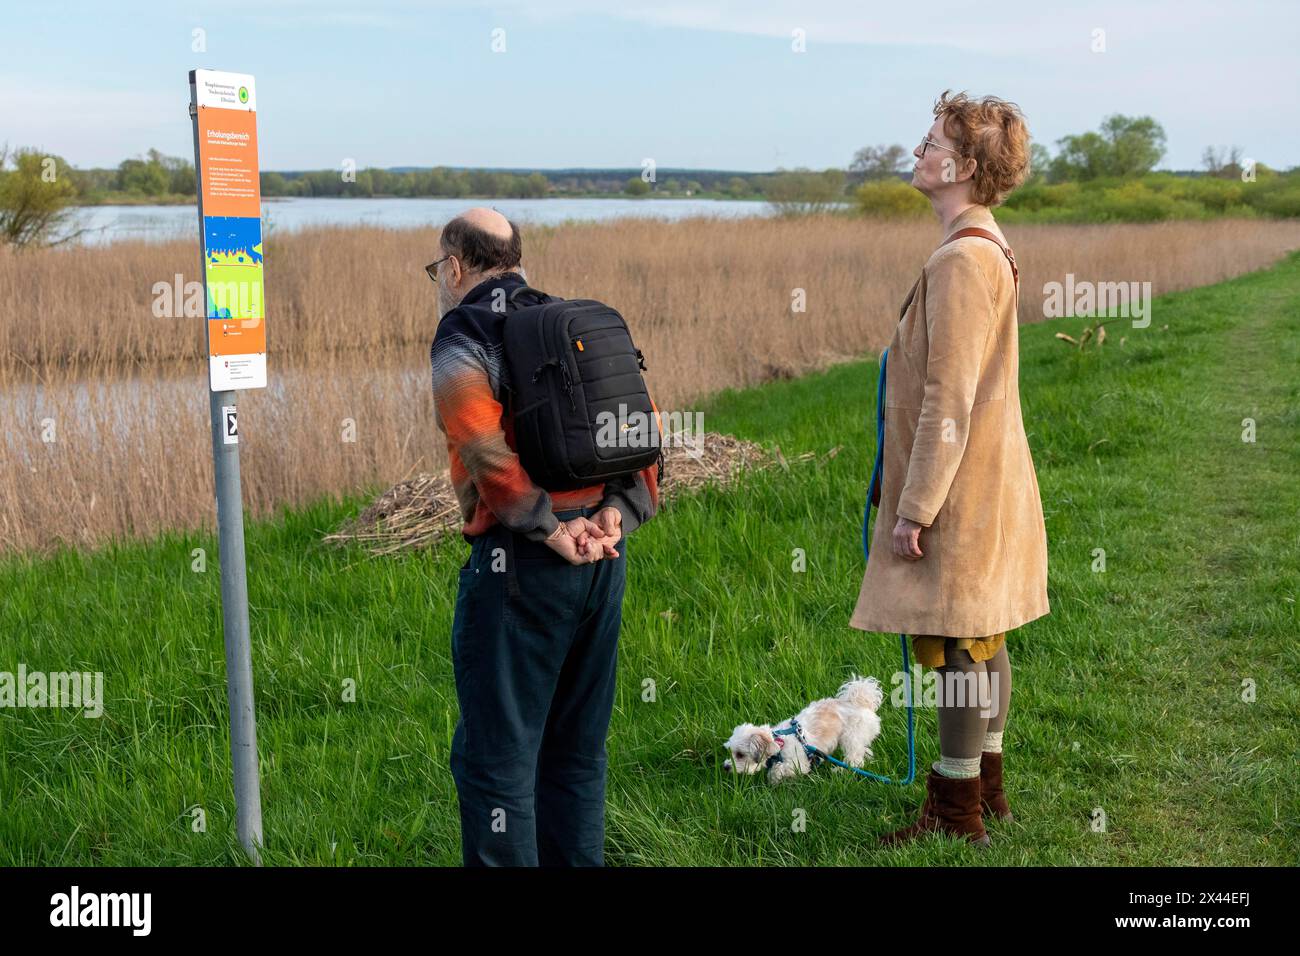 Man and woman reading sign, information board, dog, Elbtalaue near Bleckede, Lower Saxony, Germany Stock Photo